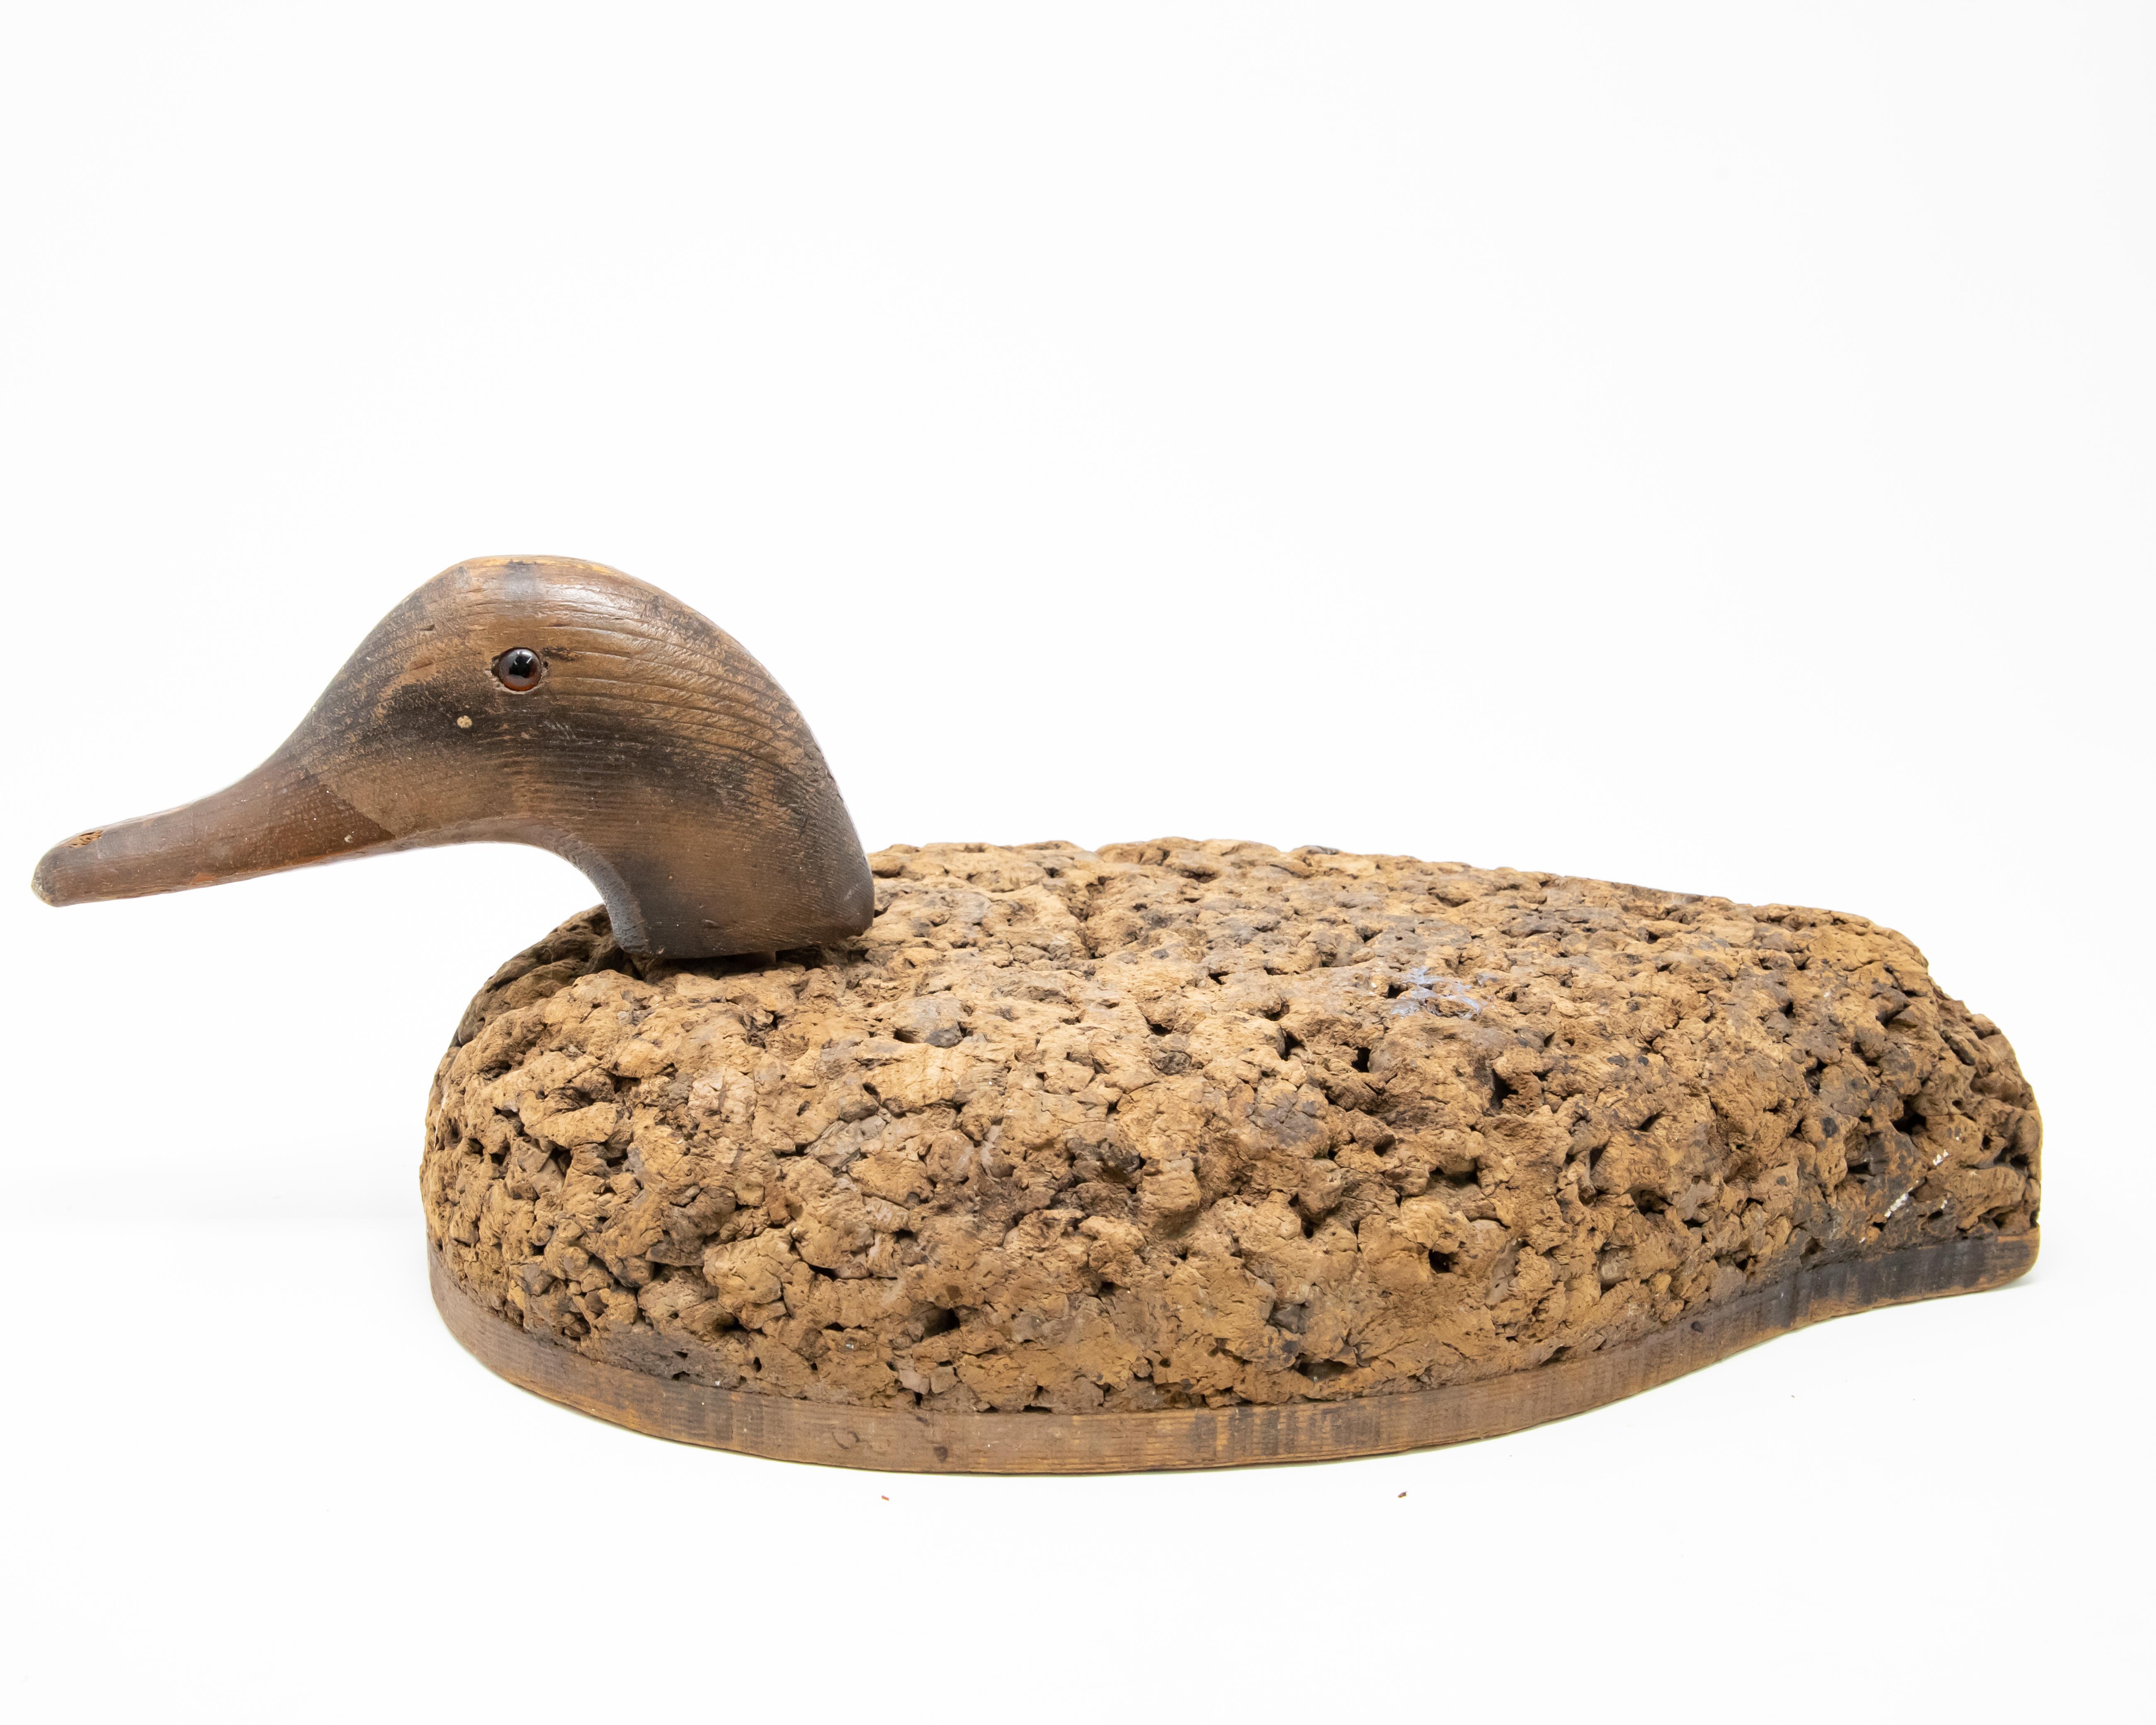 Offering this neat little Duck Decoy with a cork body and removable wooden head. Interesting texture to the body from age of the cork. Also think he would make a neat desk accessory to keep notes pinned to and push pins. The head also has glass